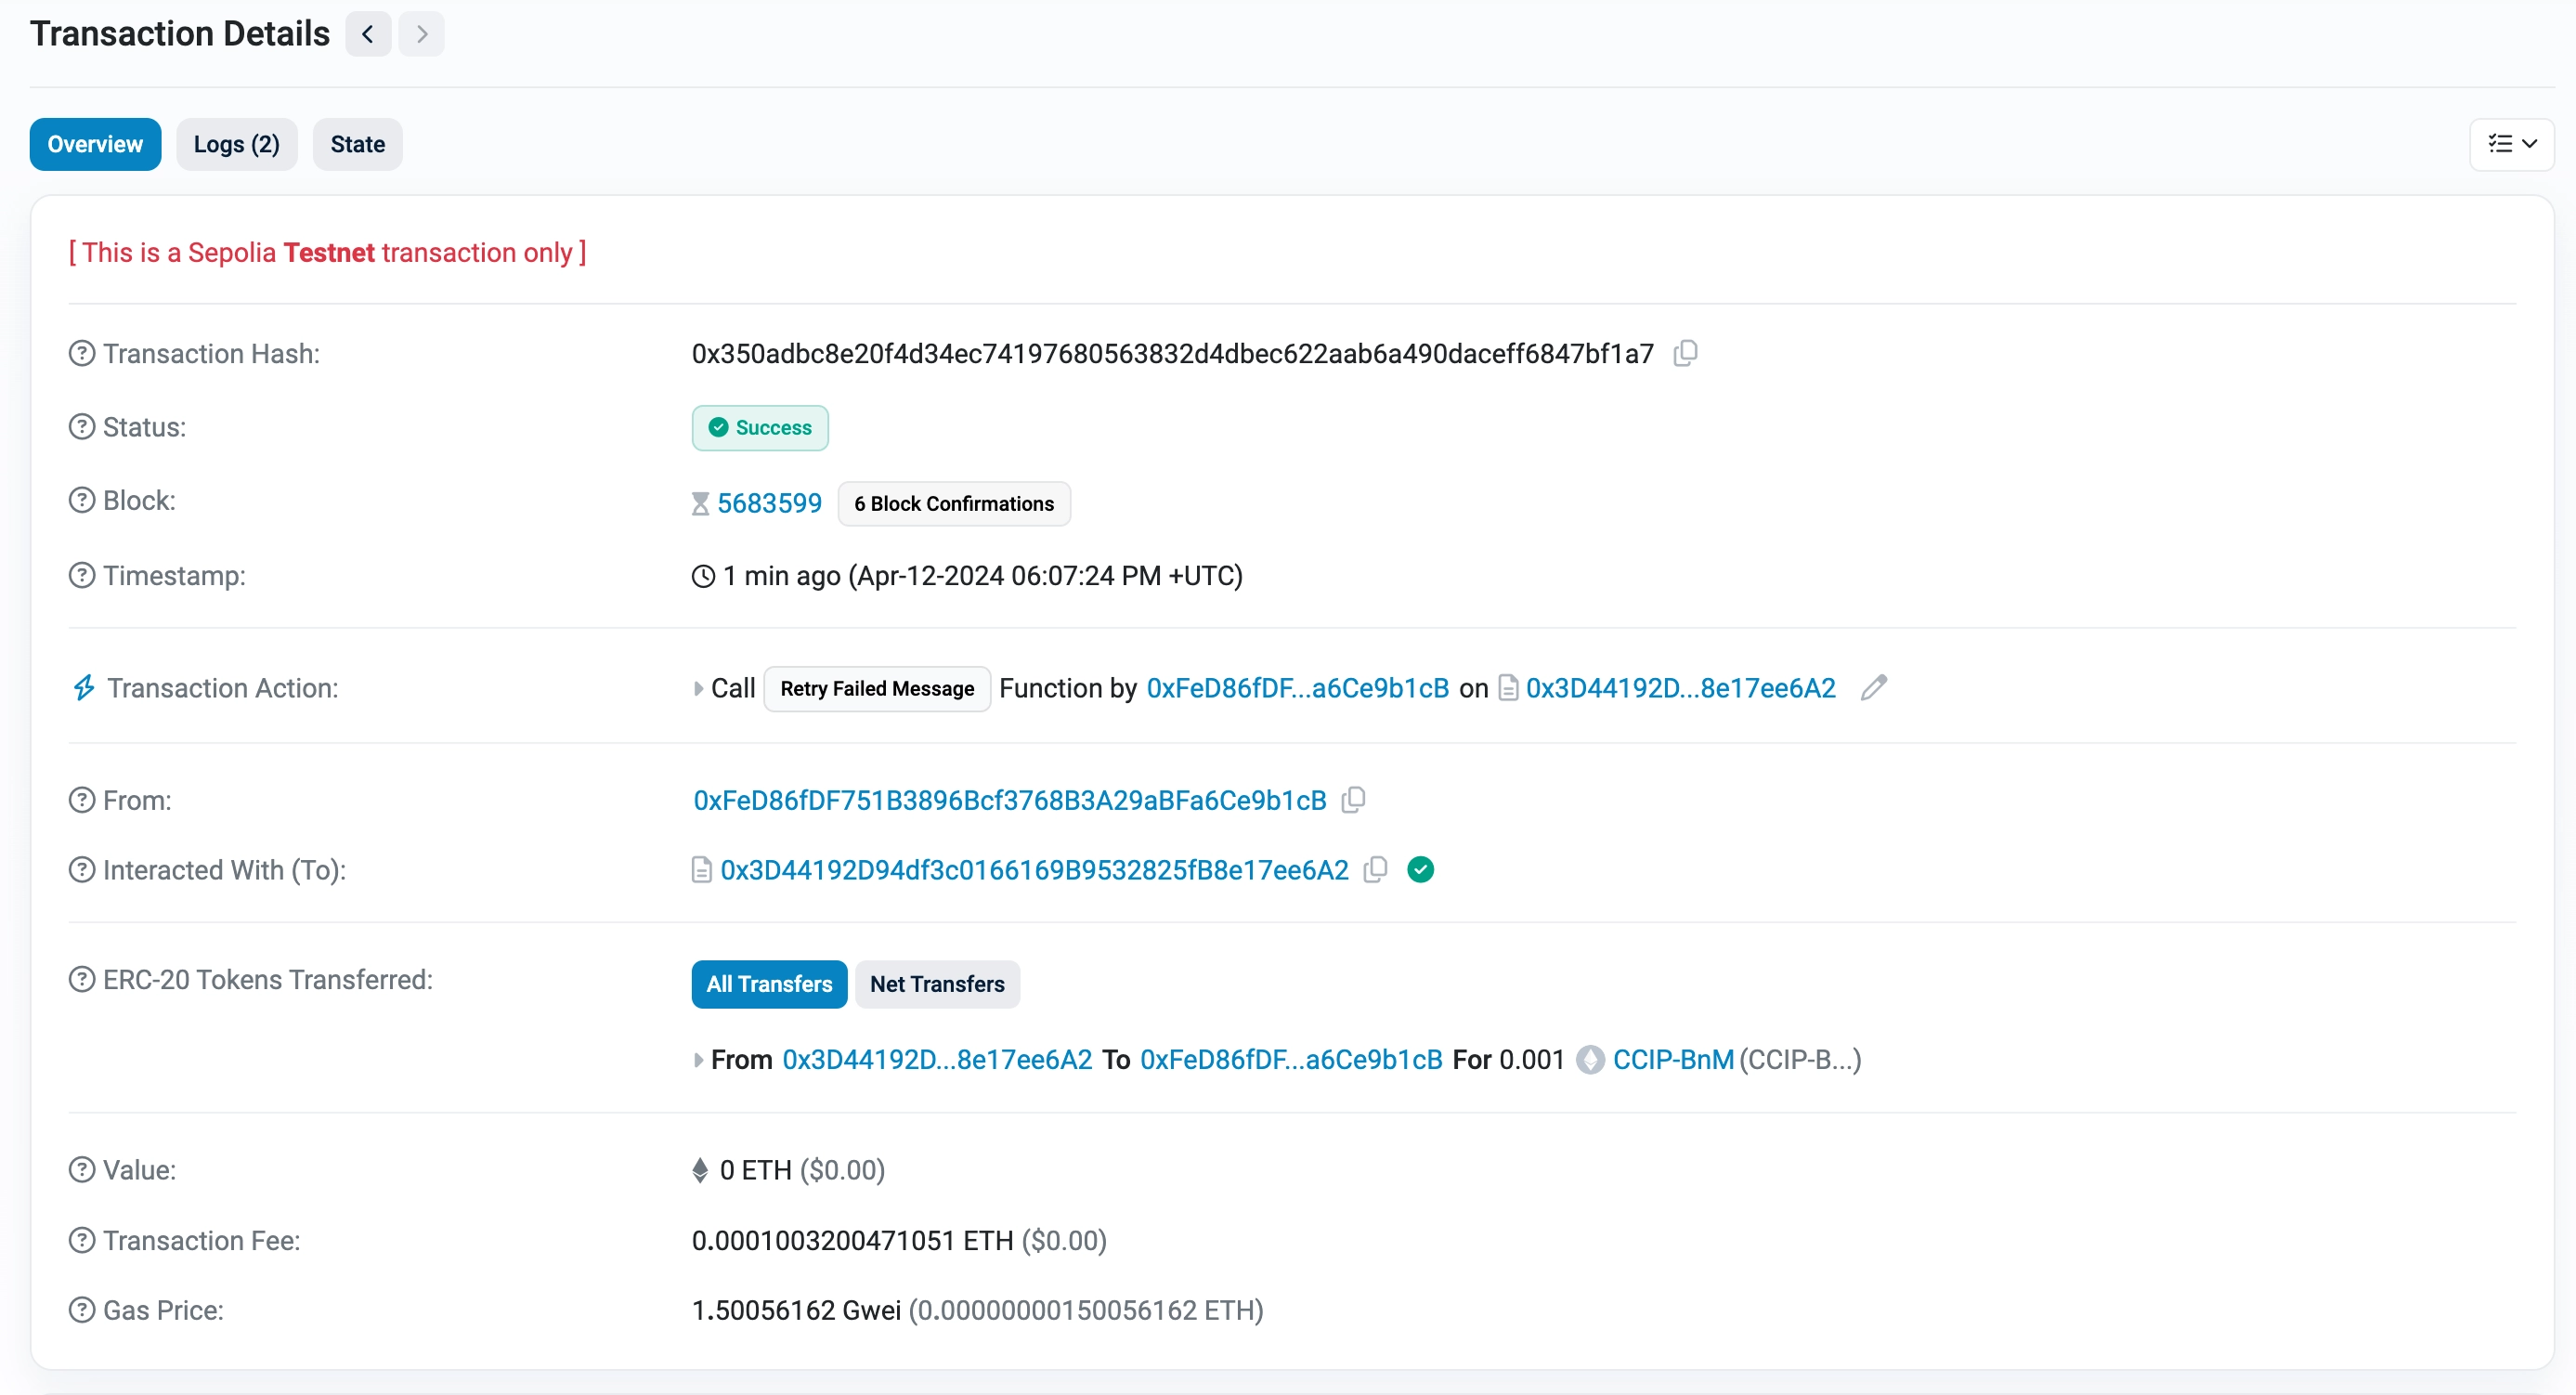 Chainlink CCIP retry failed message - tokens transferred